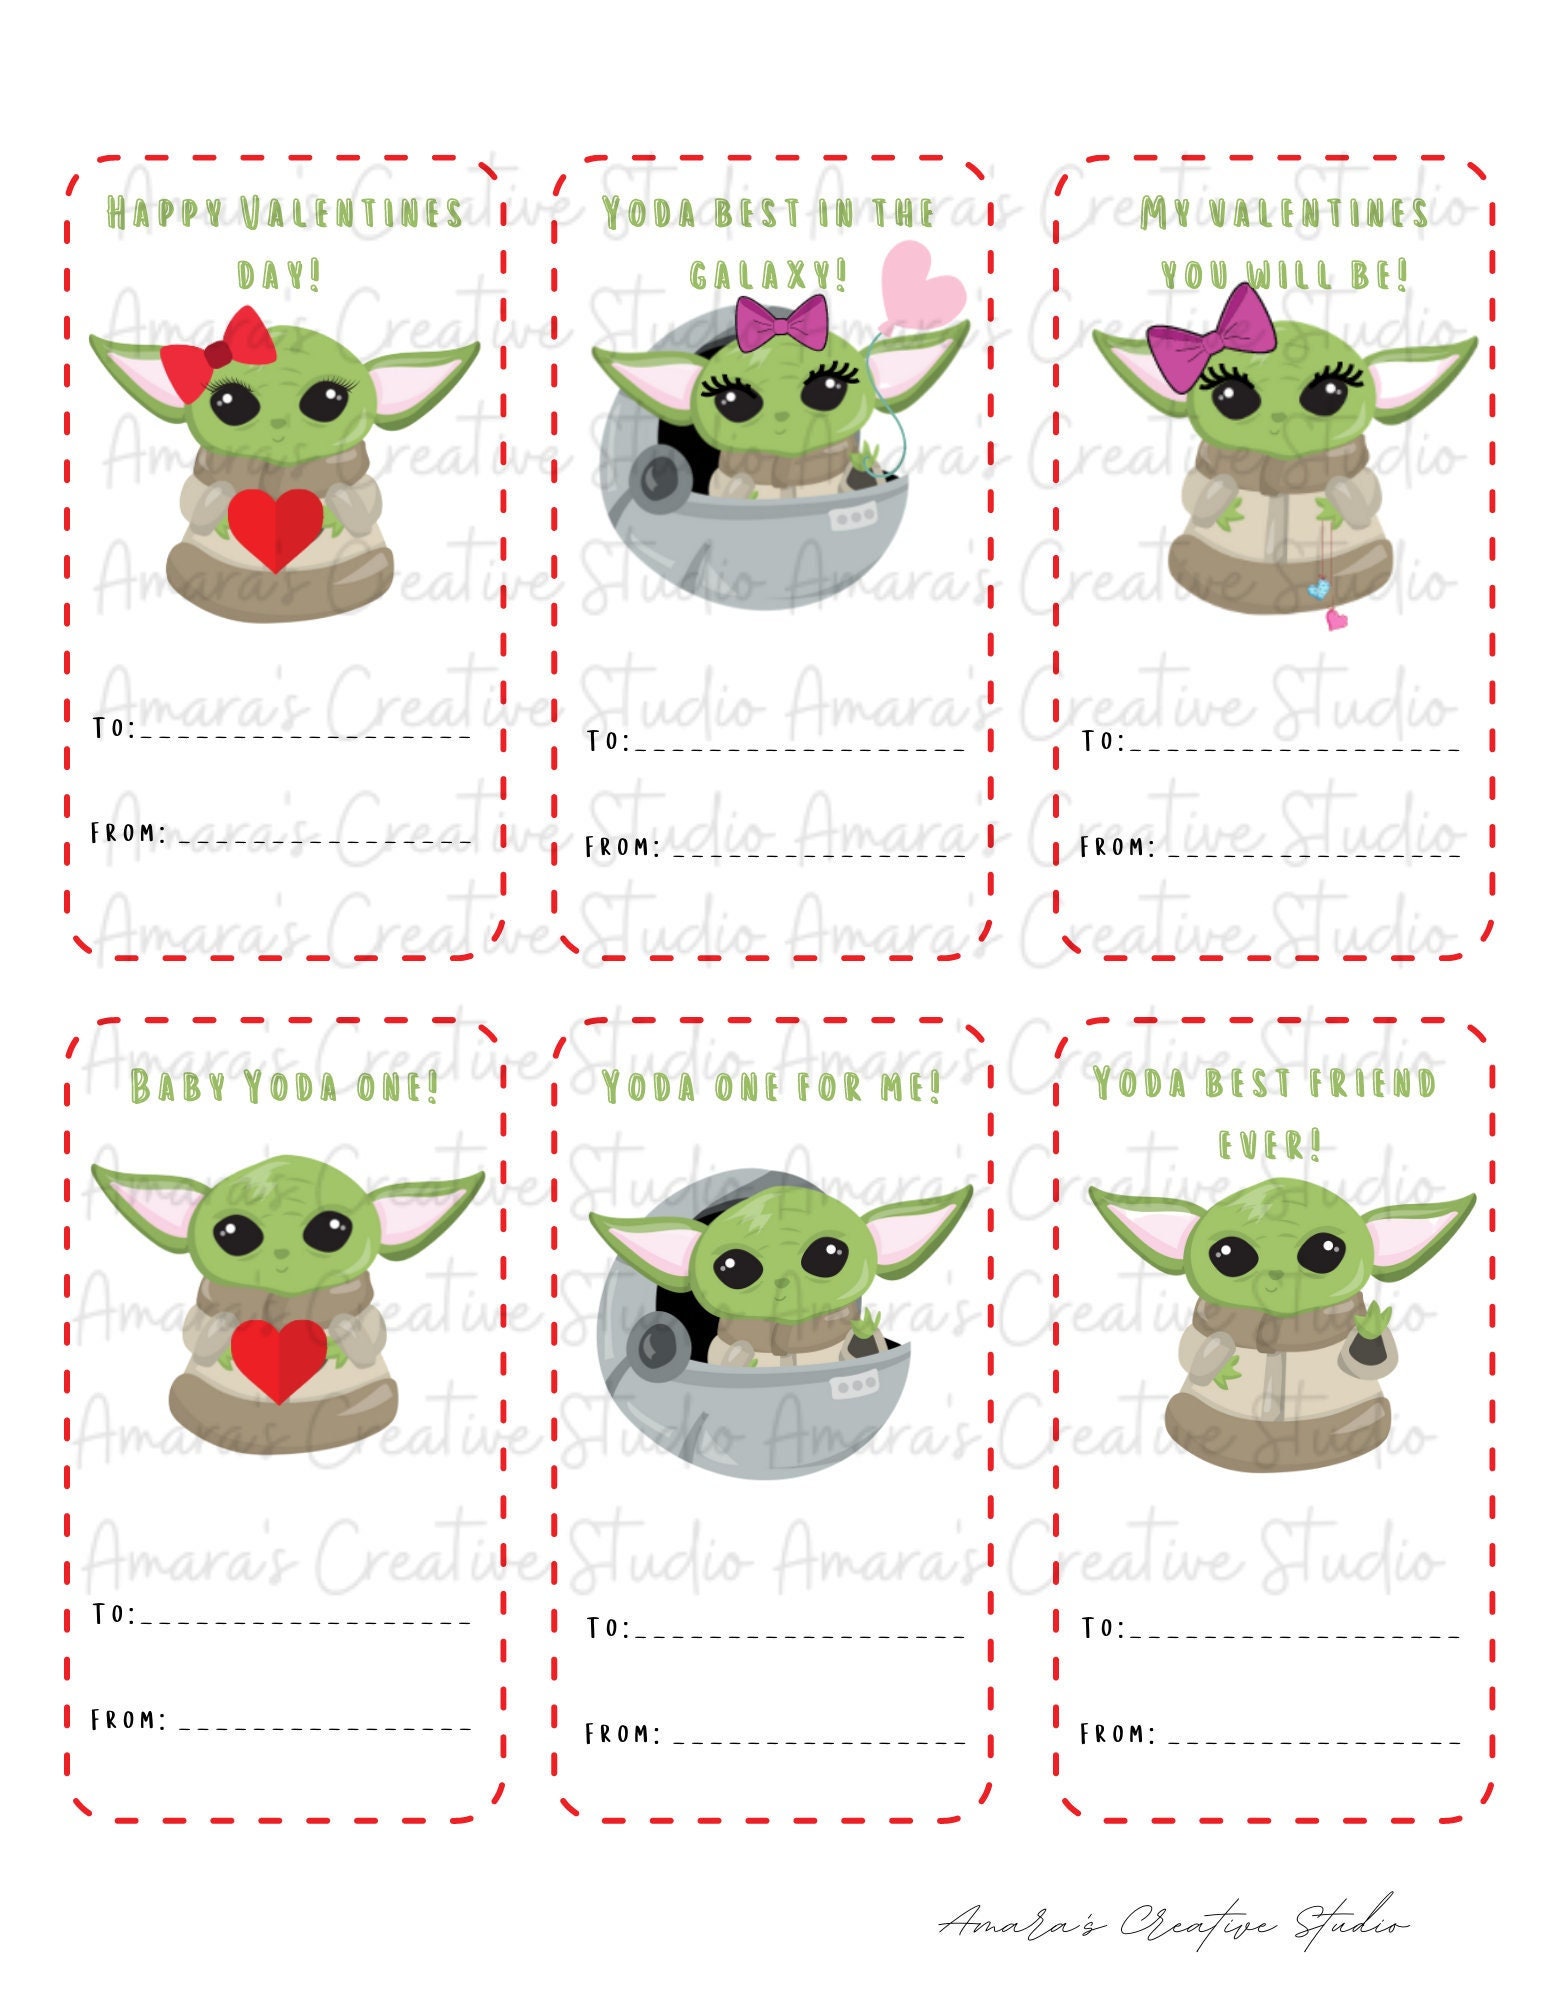 Spread some Baby Yoda love with these free printable Disney Valentines! -  Inside the Magic